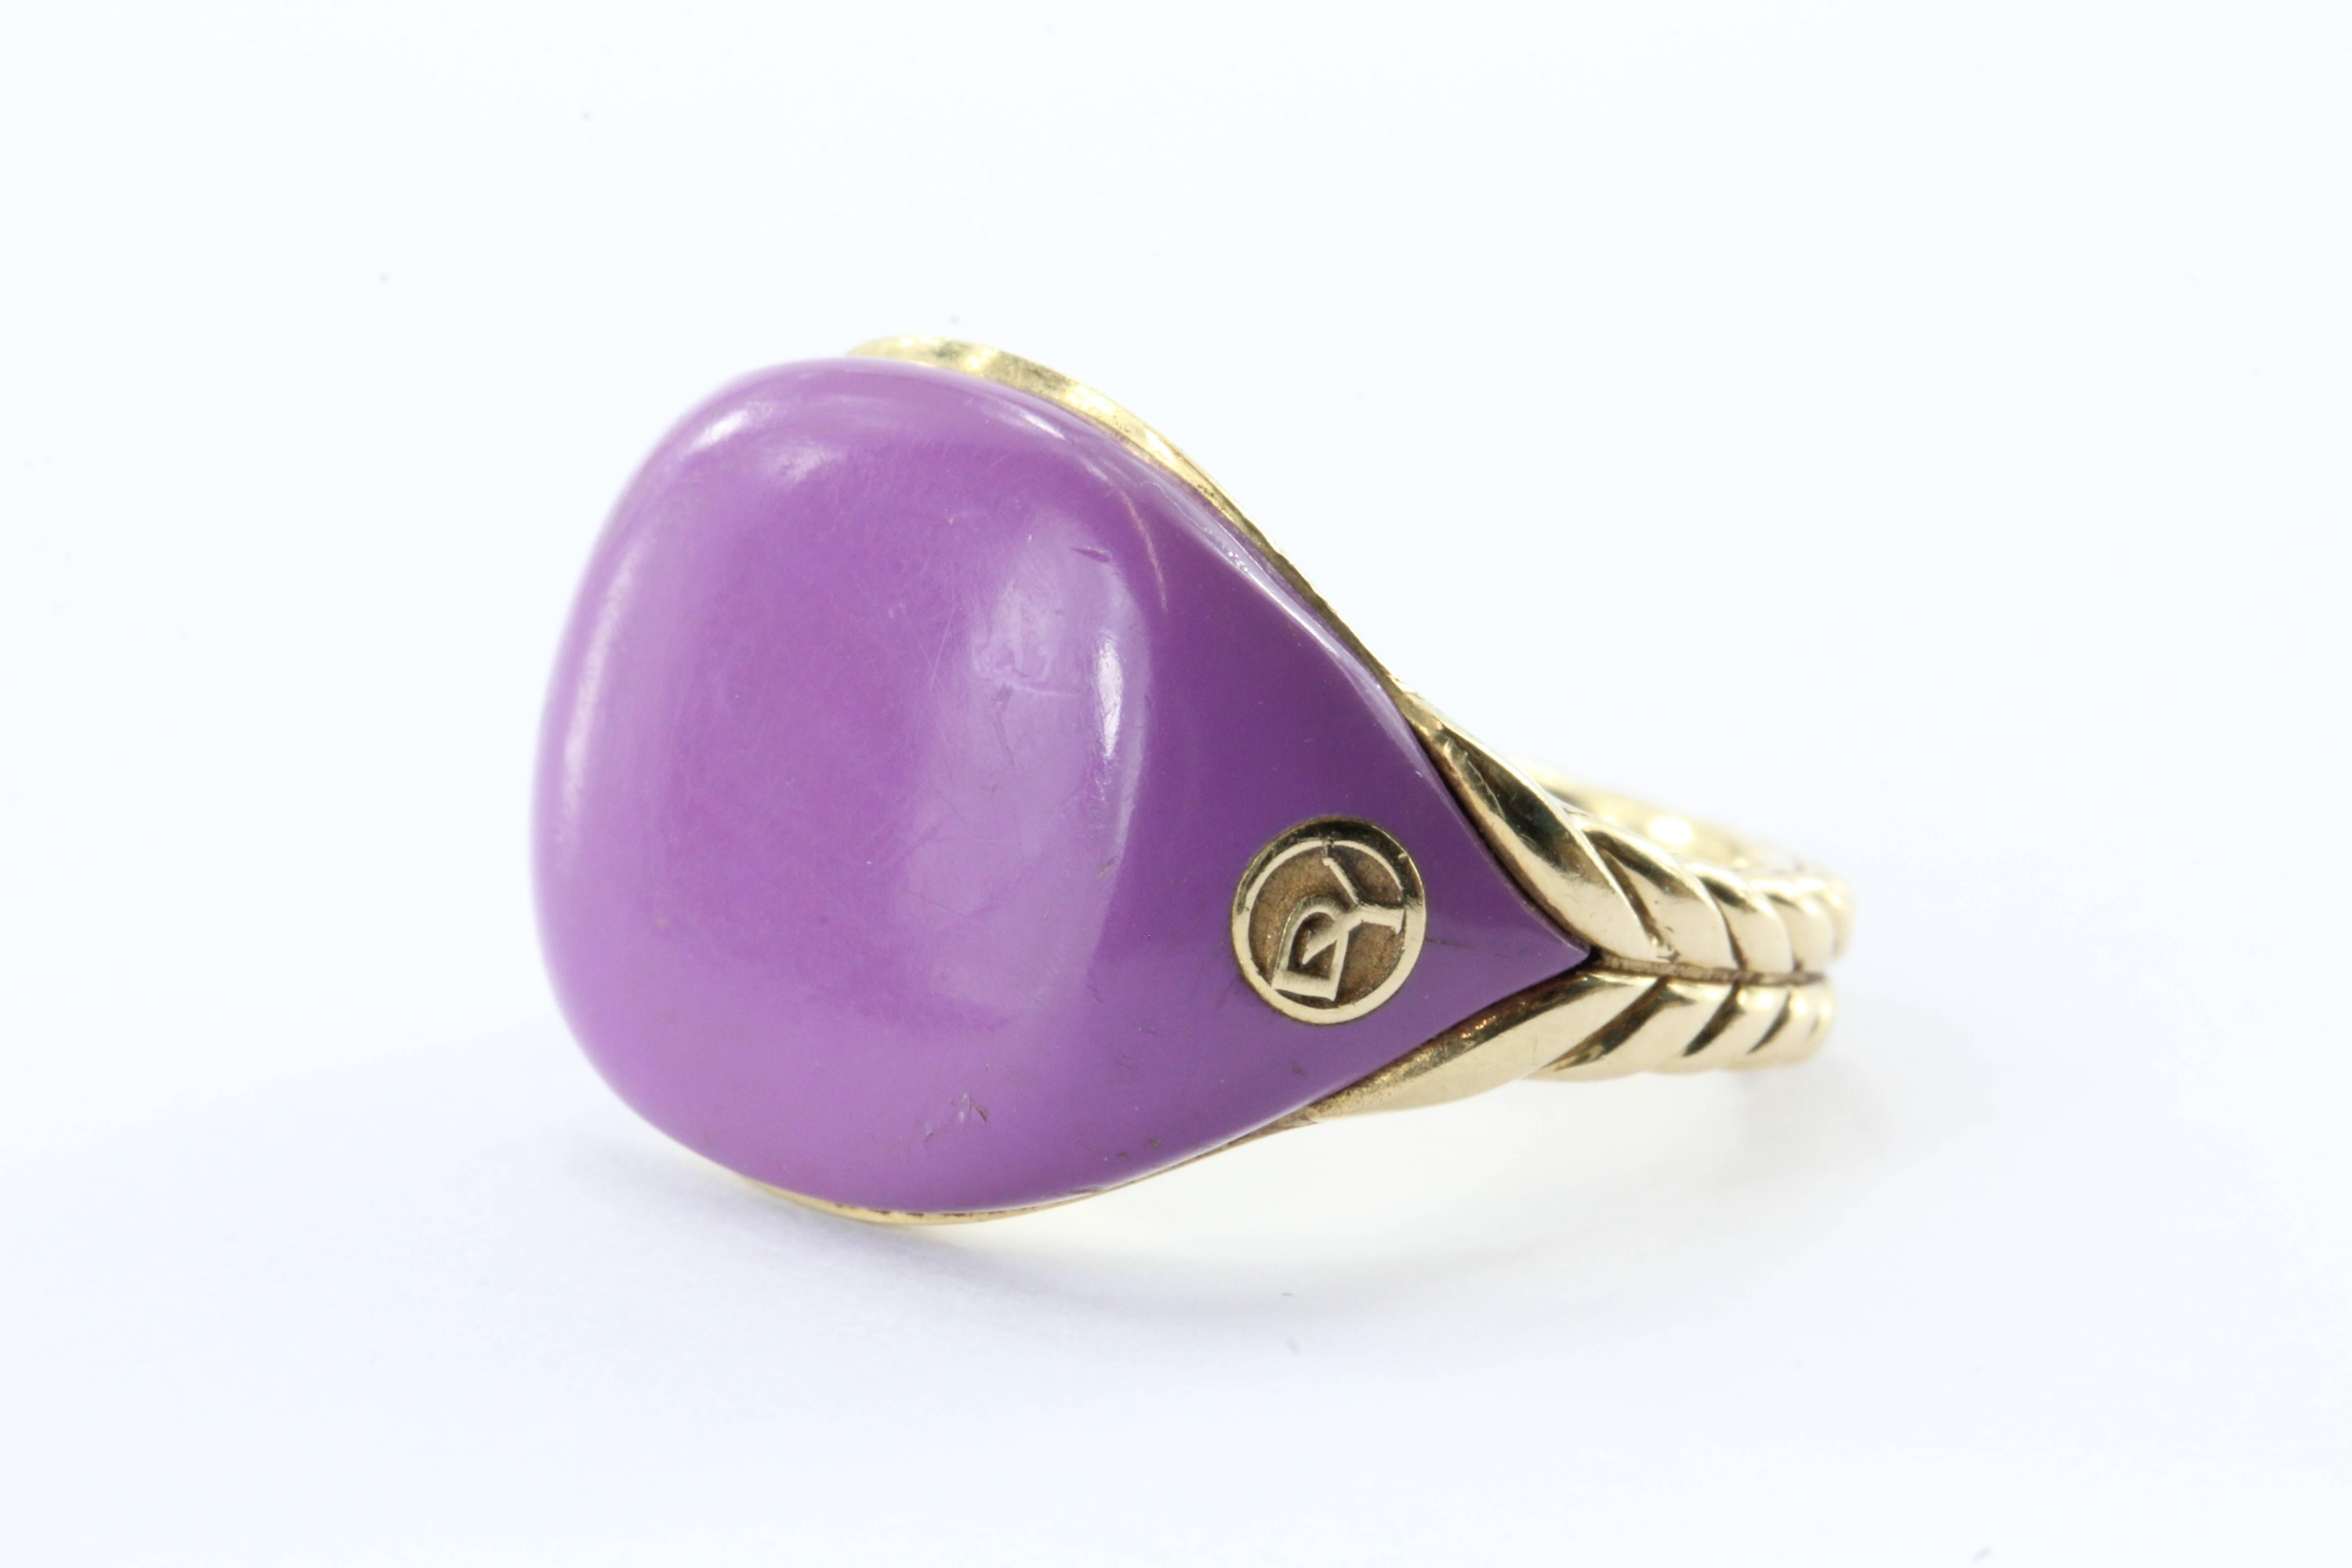 David Yurman 18K Gold Bubblegum Purple Pinky Ring Limited Edition. The ring is in great used estate condition and ready to wear. There are some scuffs to the resin that are noticeable upon close inspection. The ring is signed DY 750. The ring is a